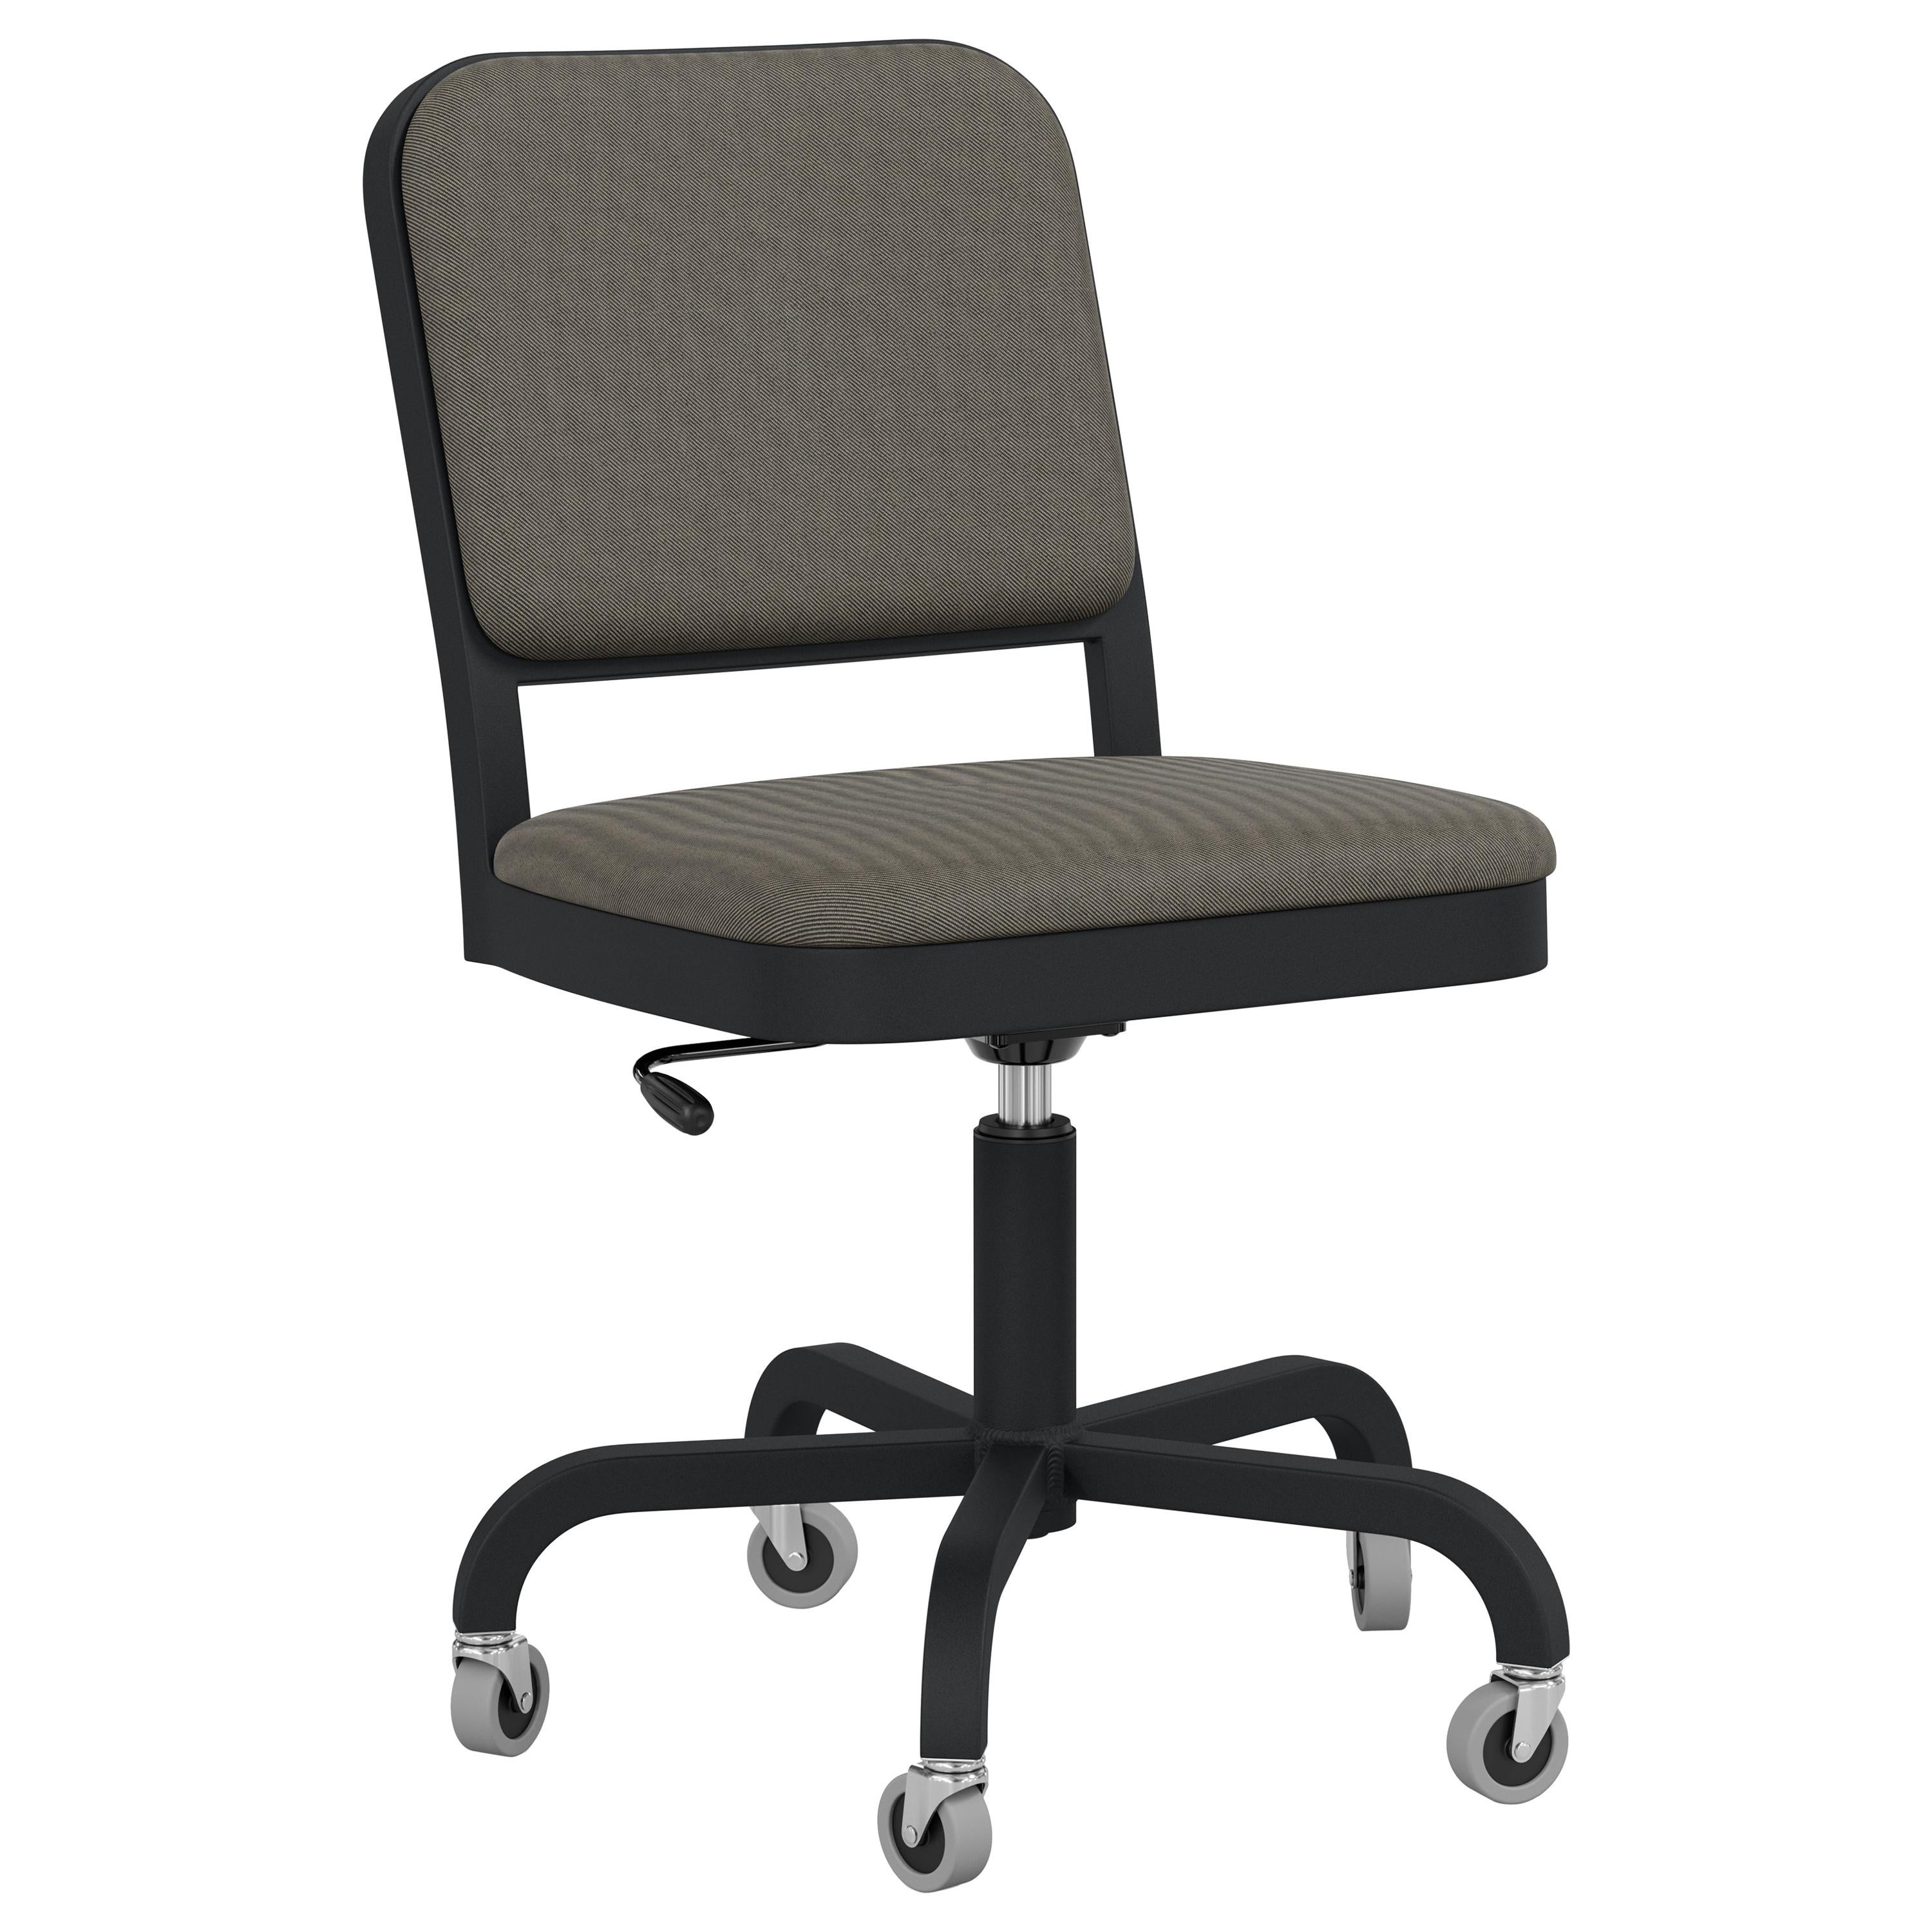 Emeco Navy Officer Swivel Chair in Black Fabric with Black Powder Coated Frame